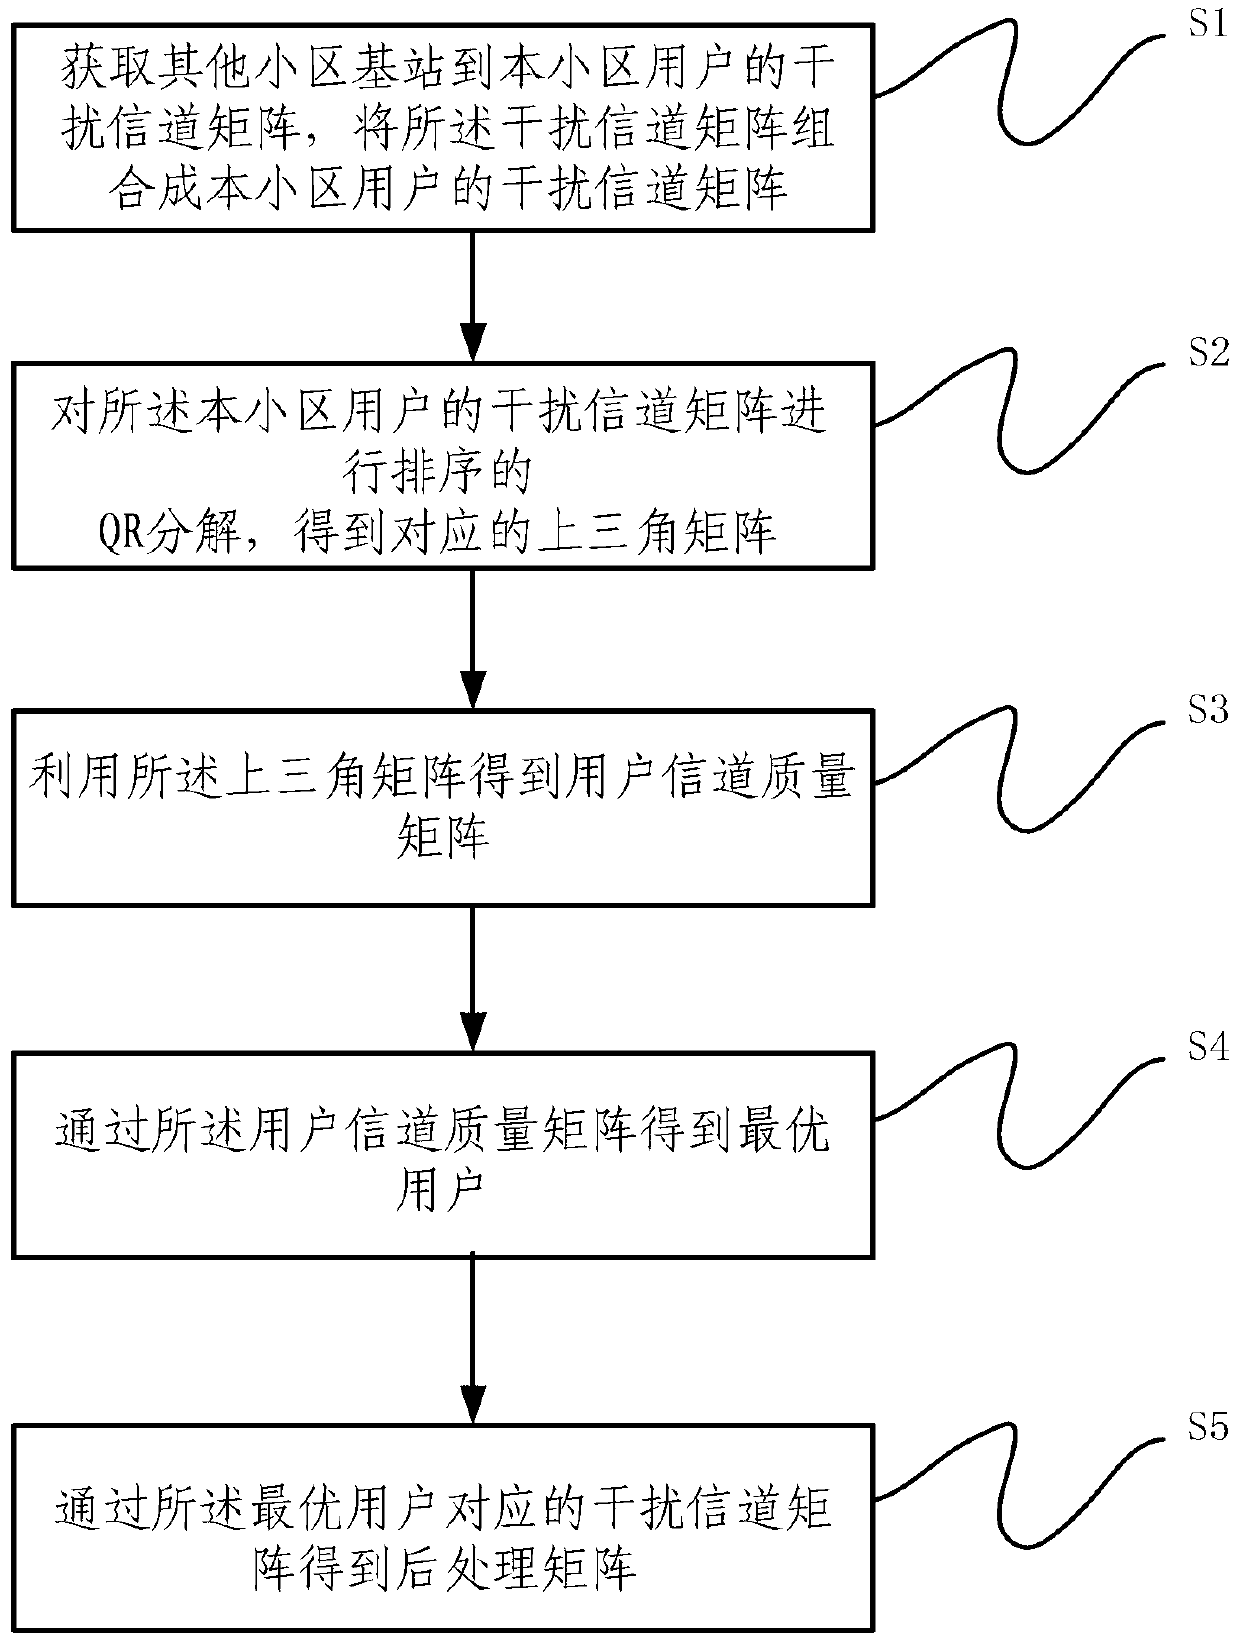 User selection method in multi-community multi-user interference channel system